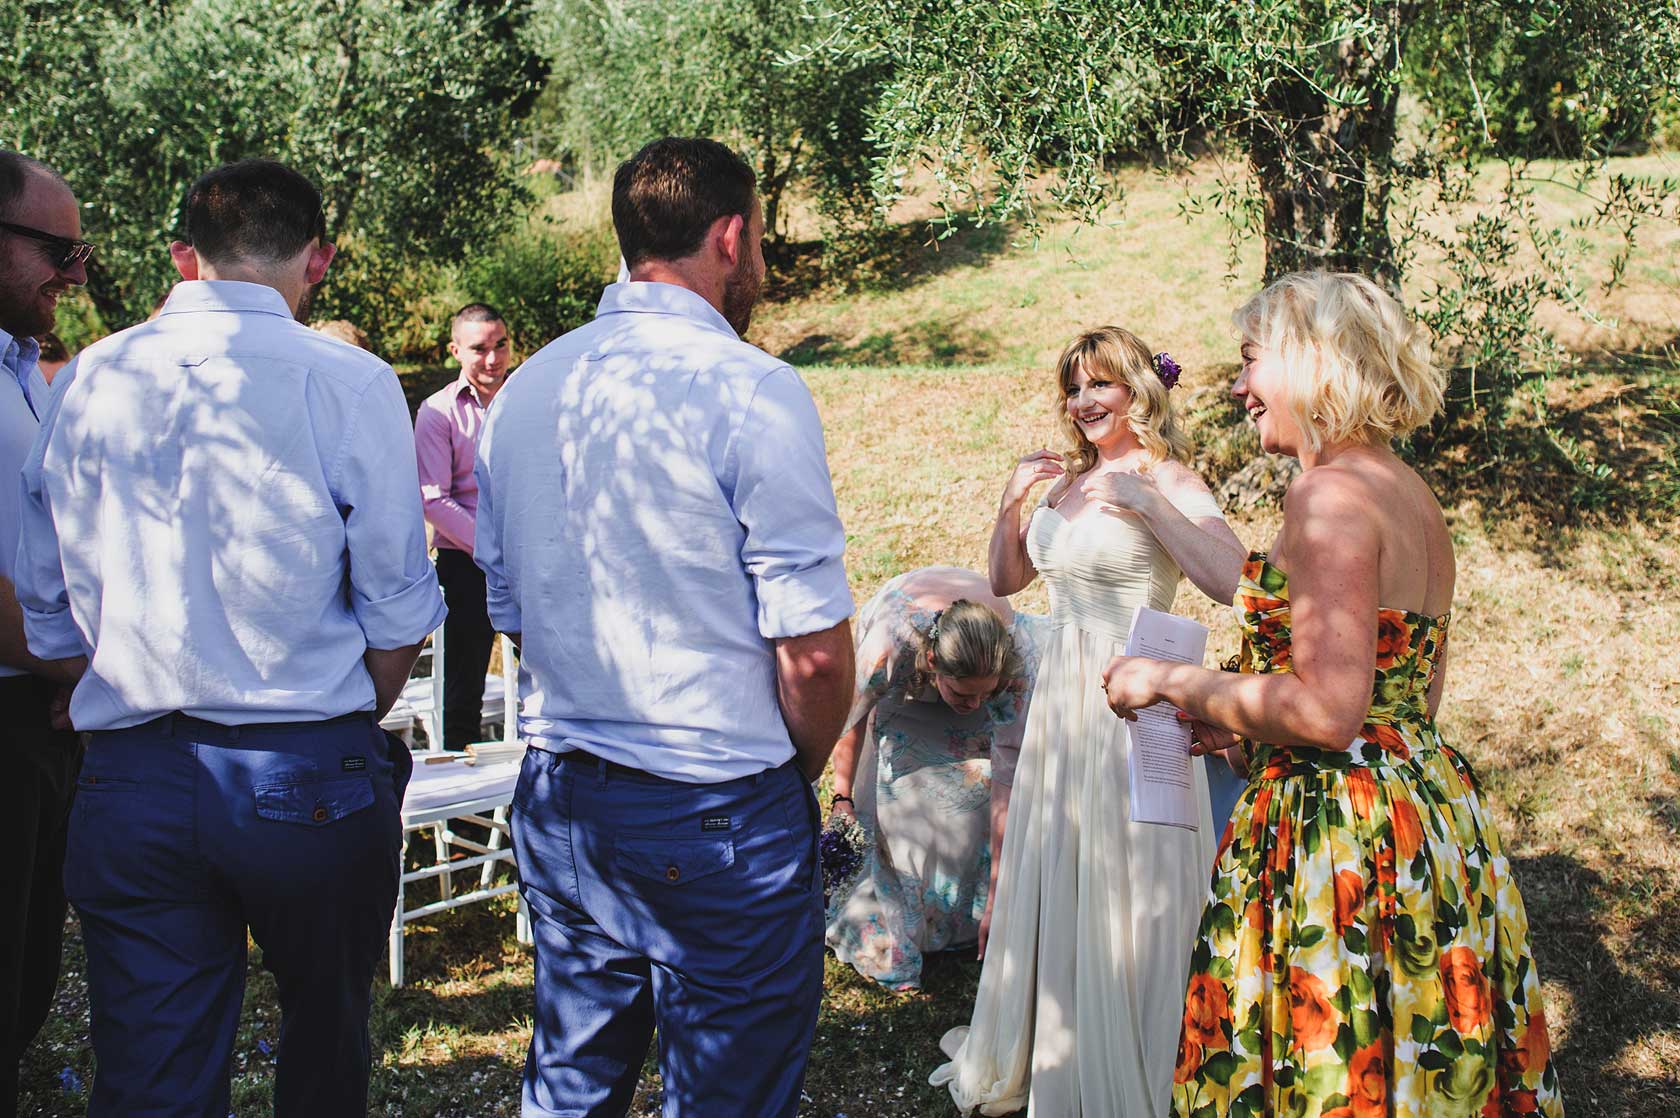 Reportage Wedding Photography in Italy